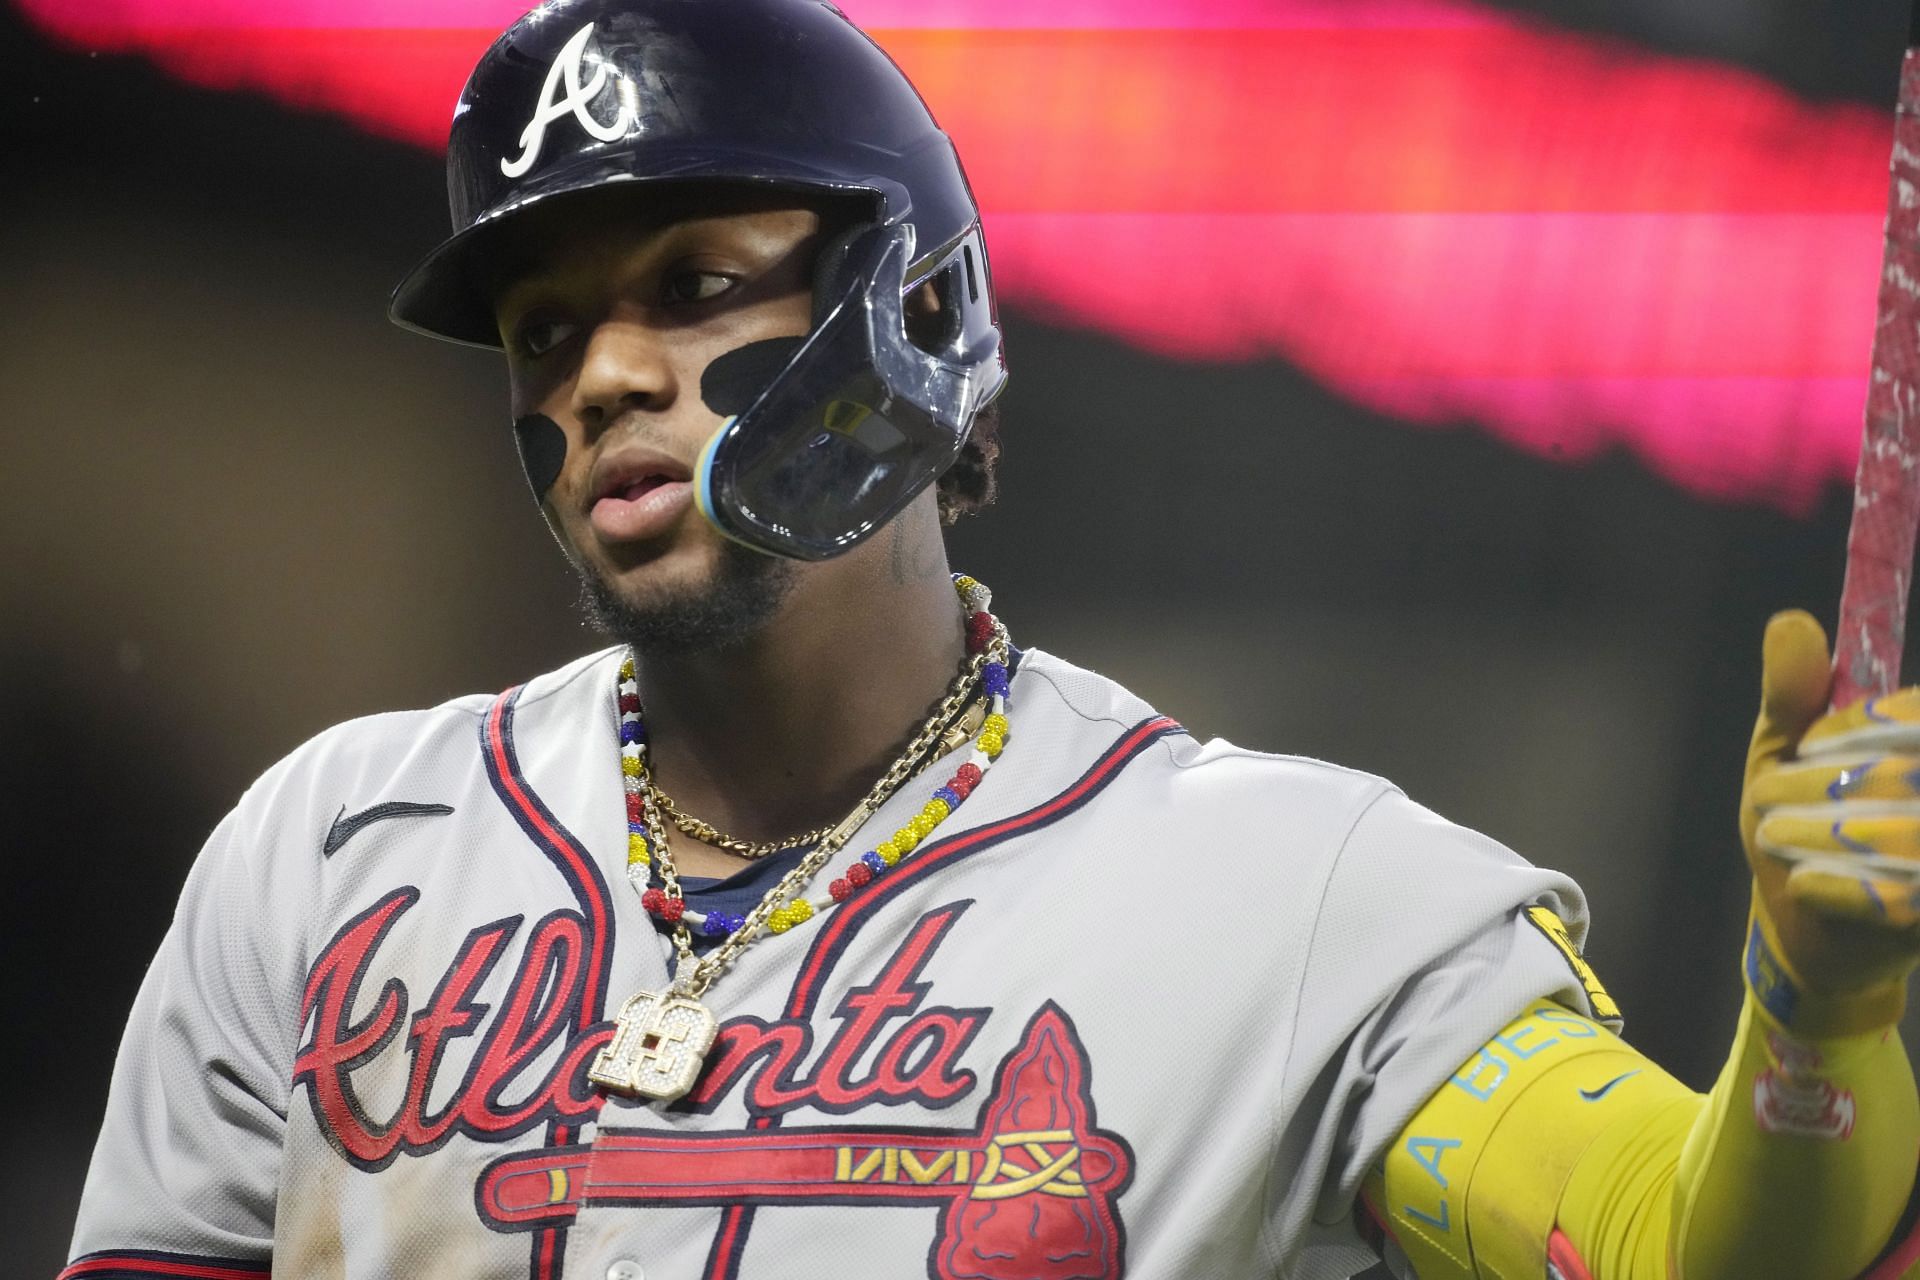 Ronald Acuna Jr. is currently leading various MLB stats and is one of the top contenders for the 2023 NL MVP.